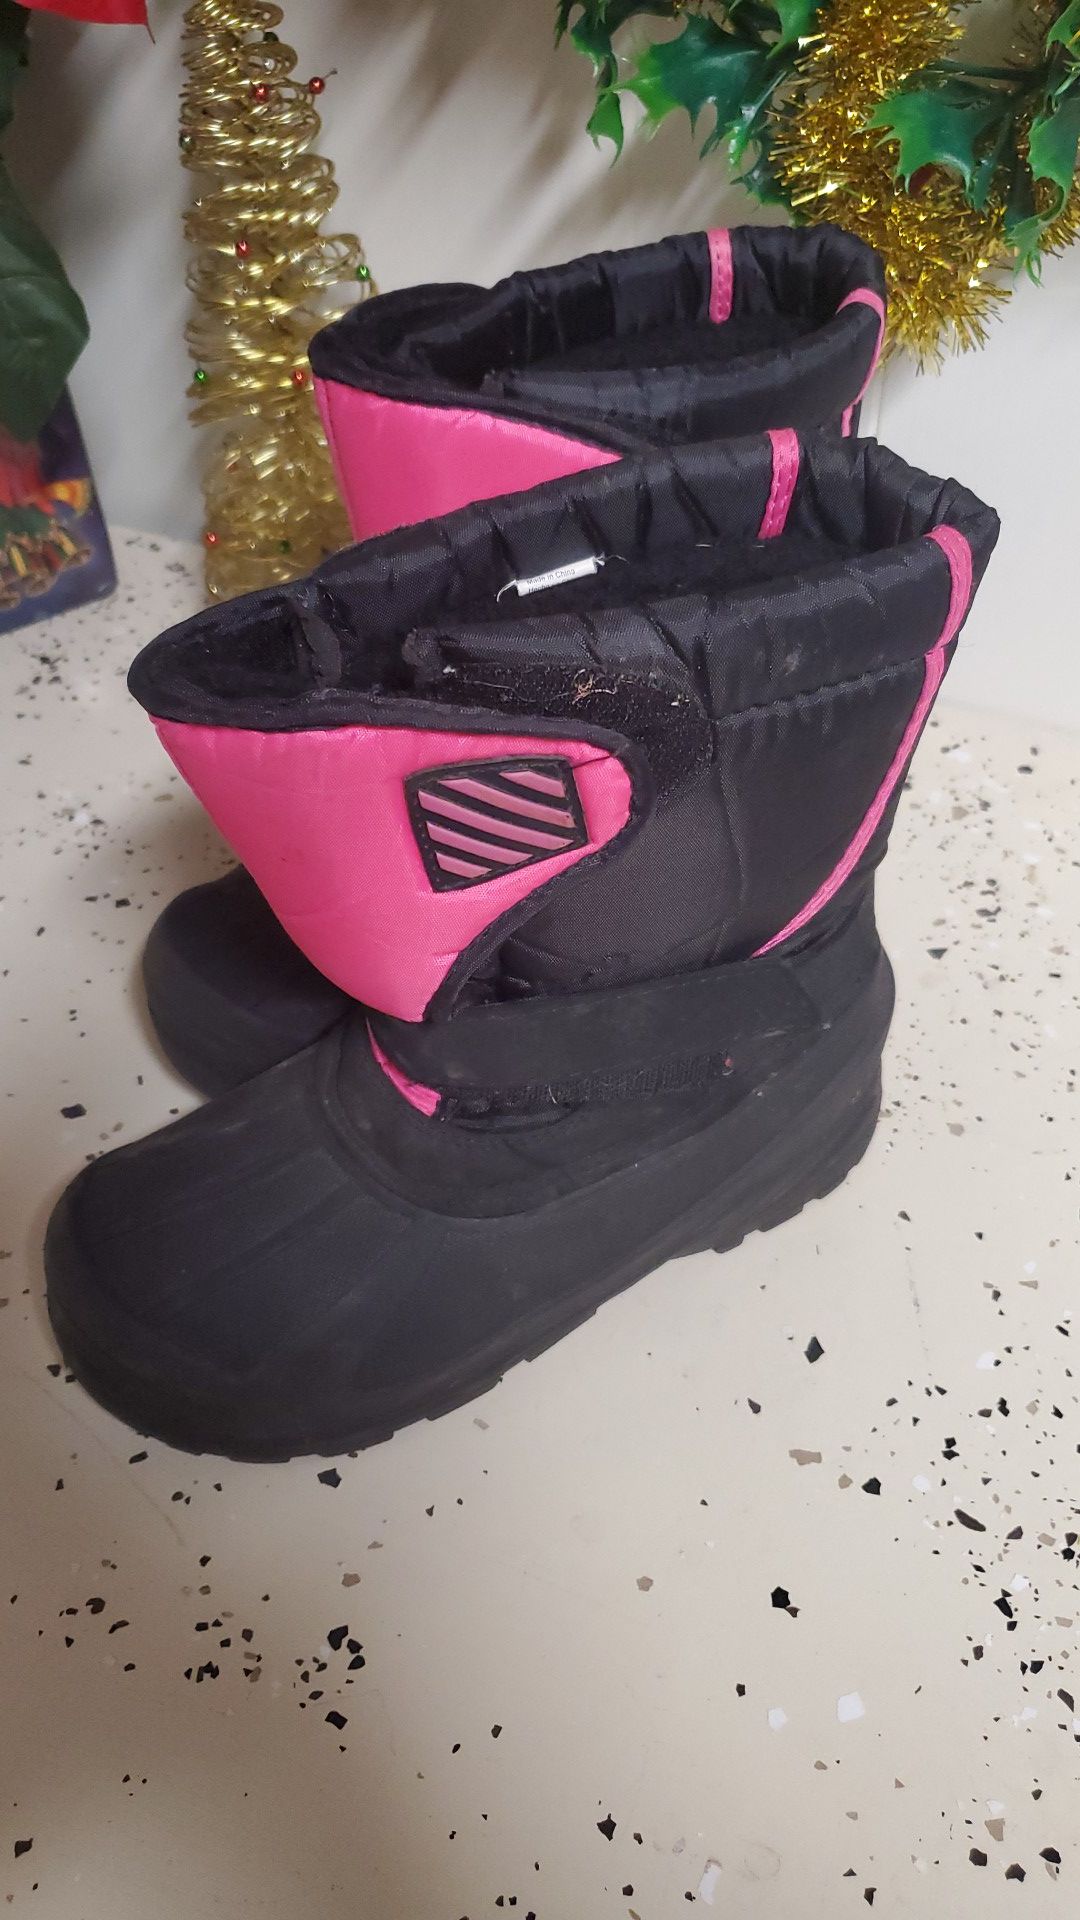 Girls snow boots size 4